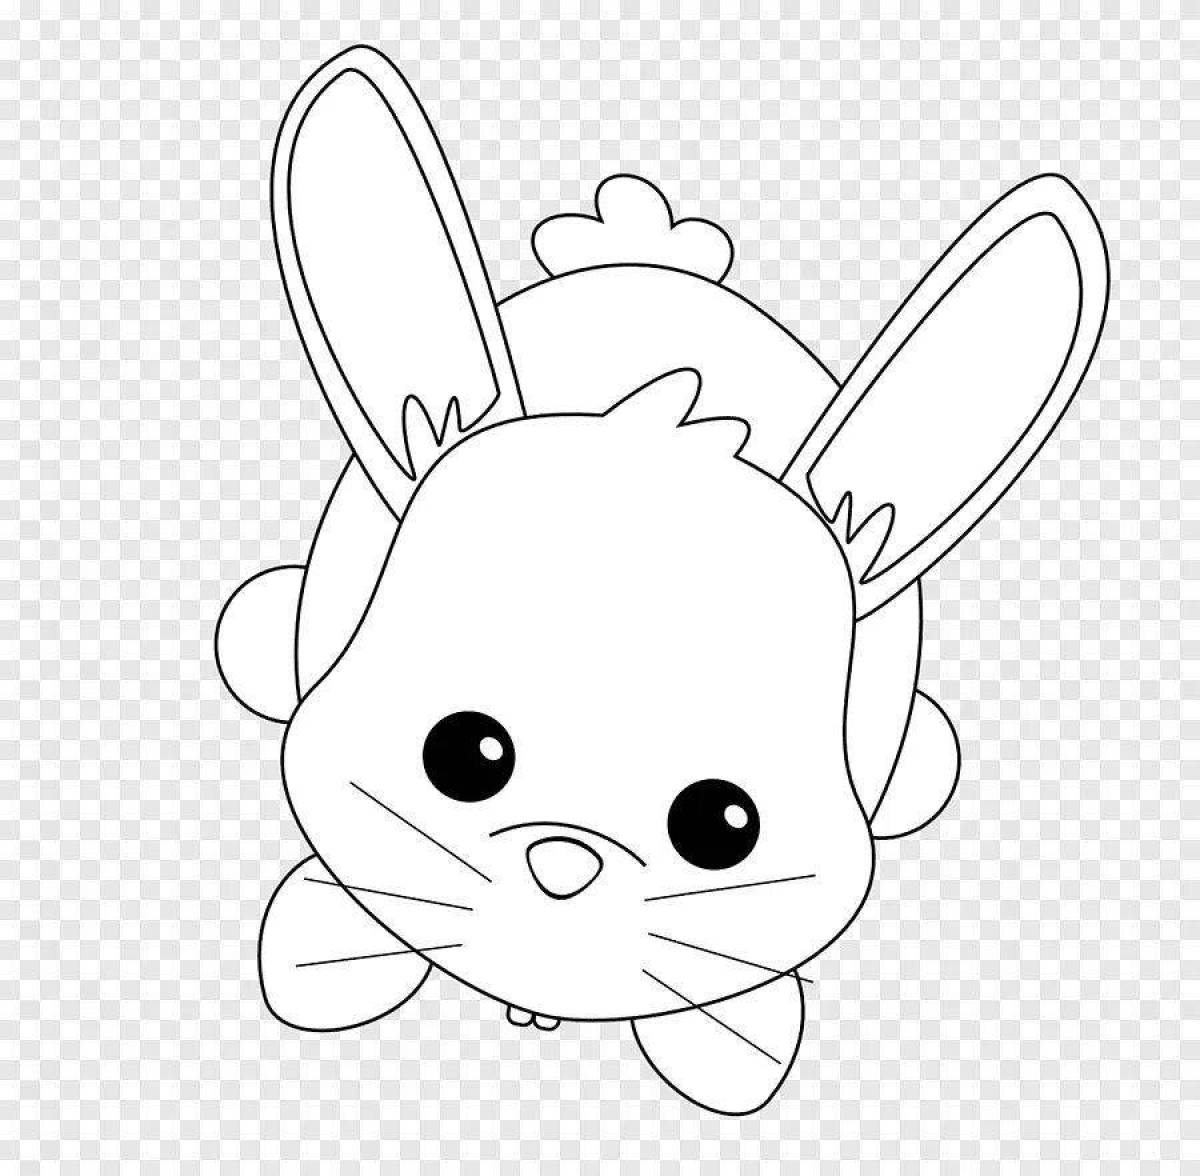 Coloring page friendly rabbit and cat